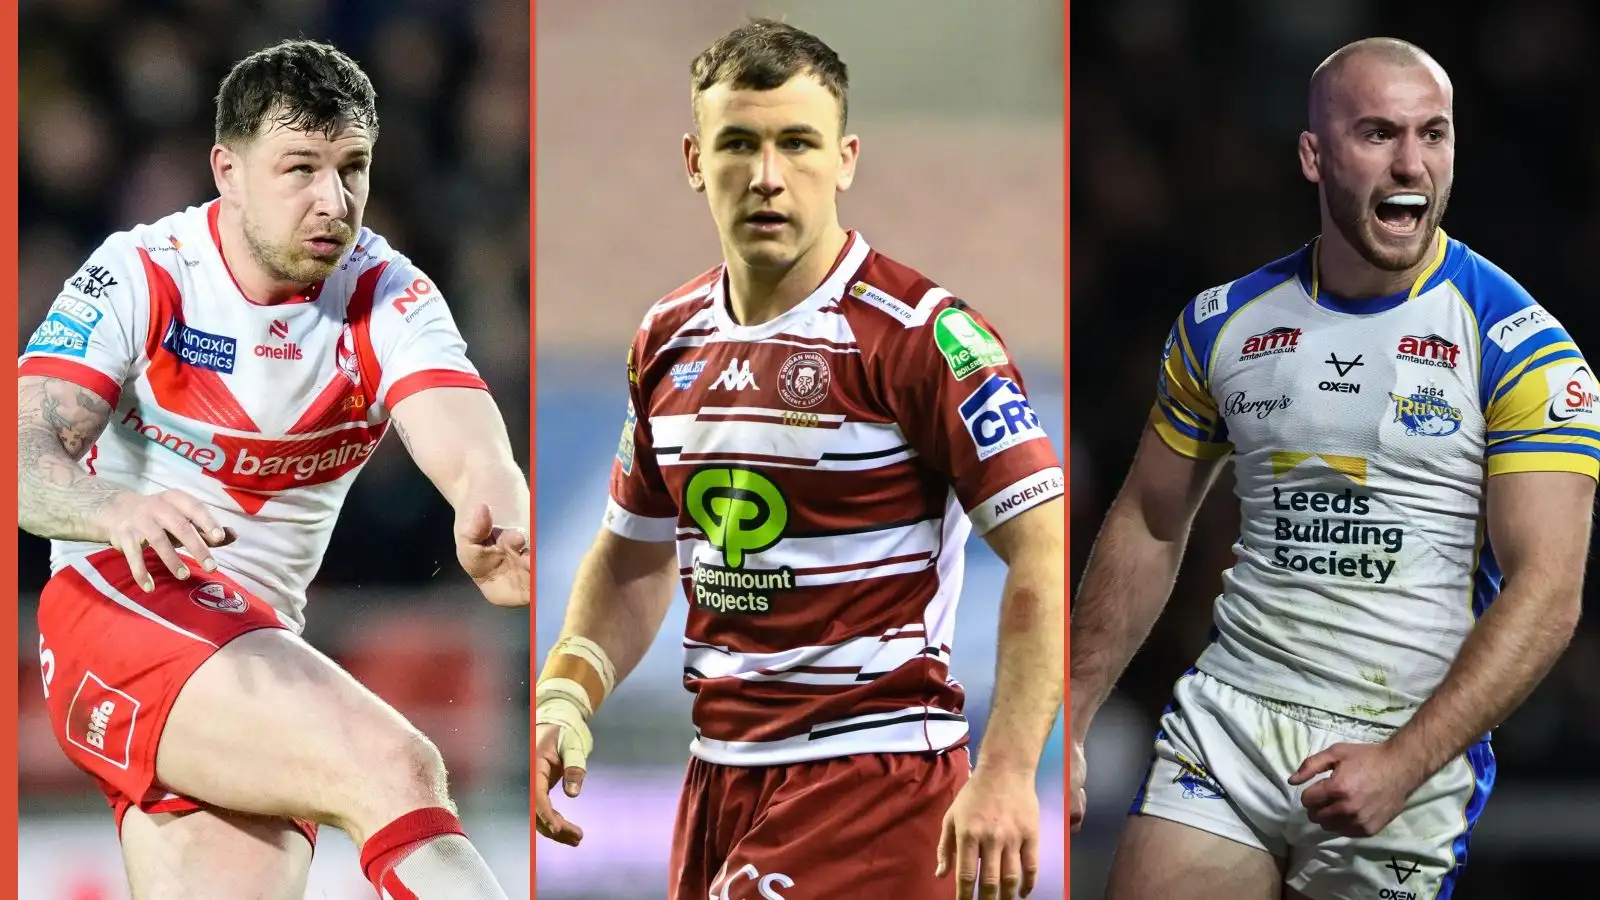 An ultimate 13 of rugby league players born in Widnes, including St Helens quintet